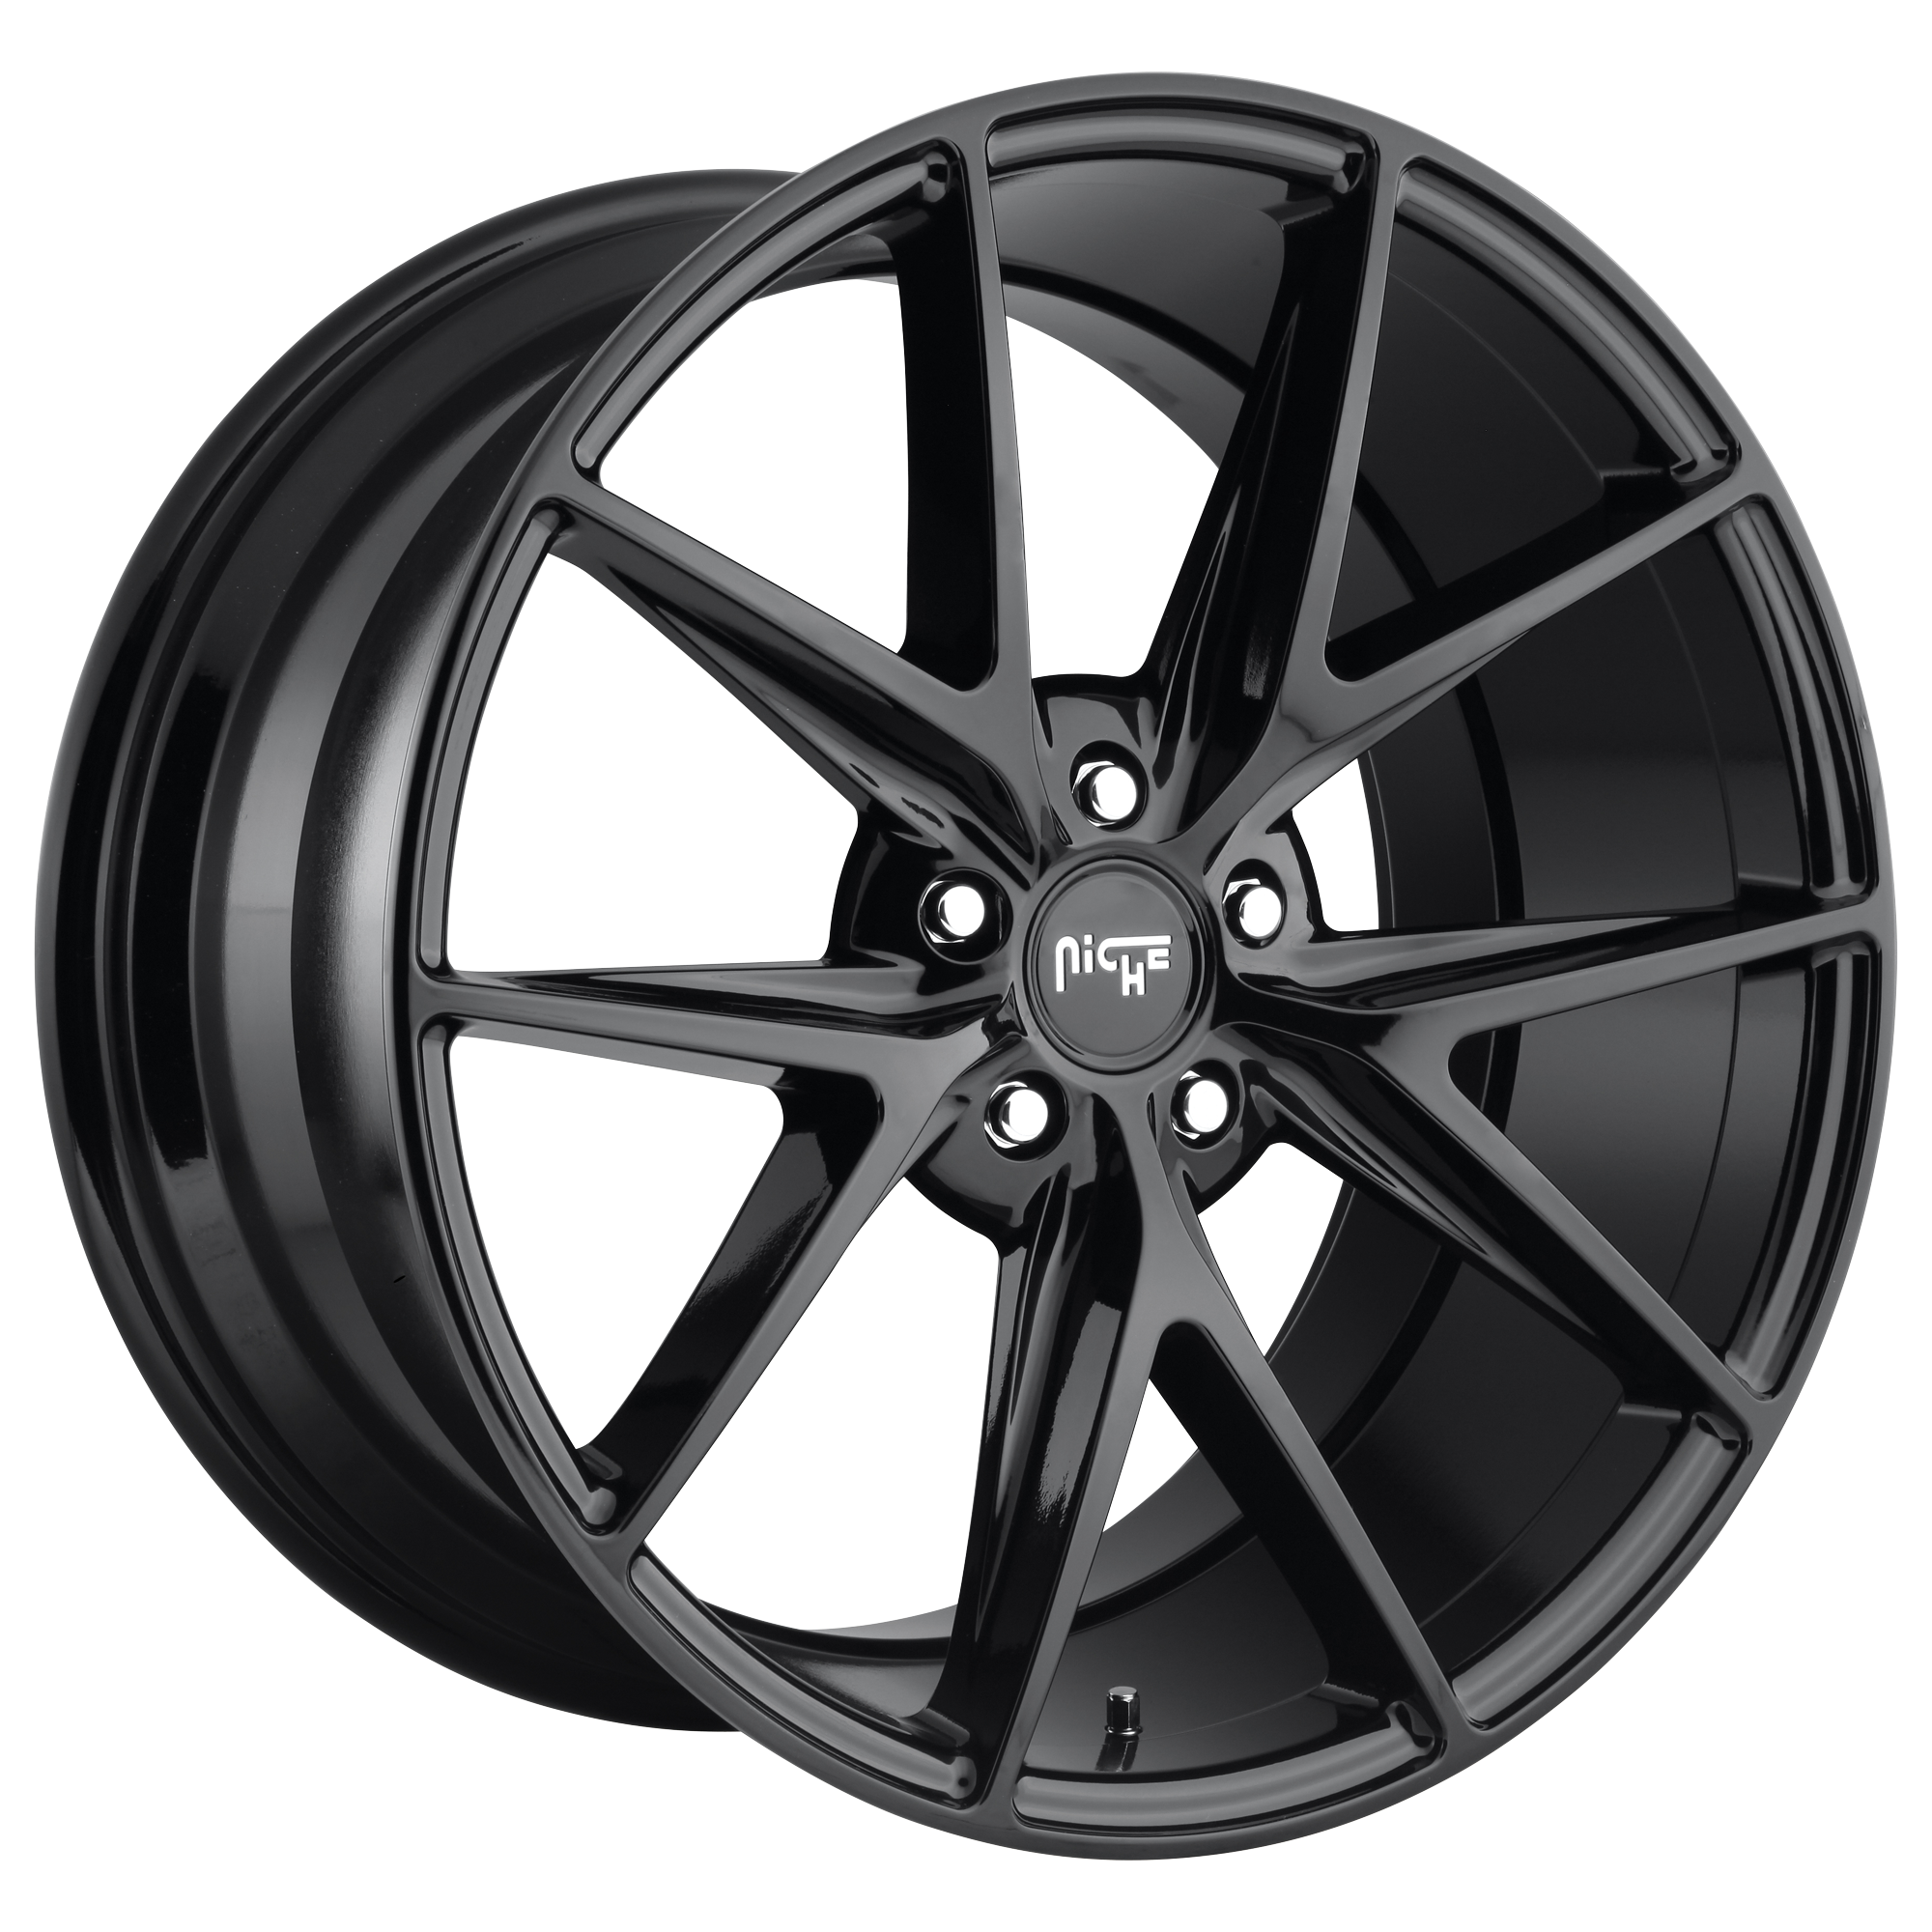 MISANO 20x9 5x120.00 GLOSS BLACK (35 mm) - Tires and Engine Performance